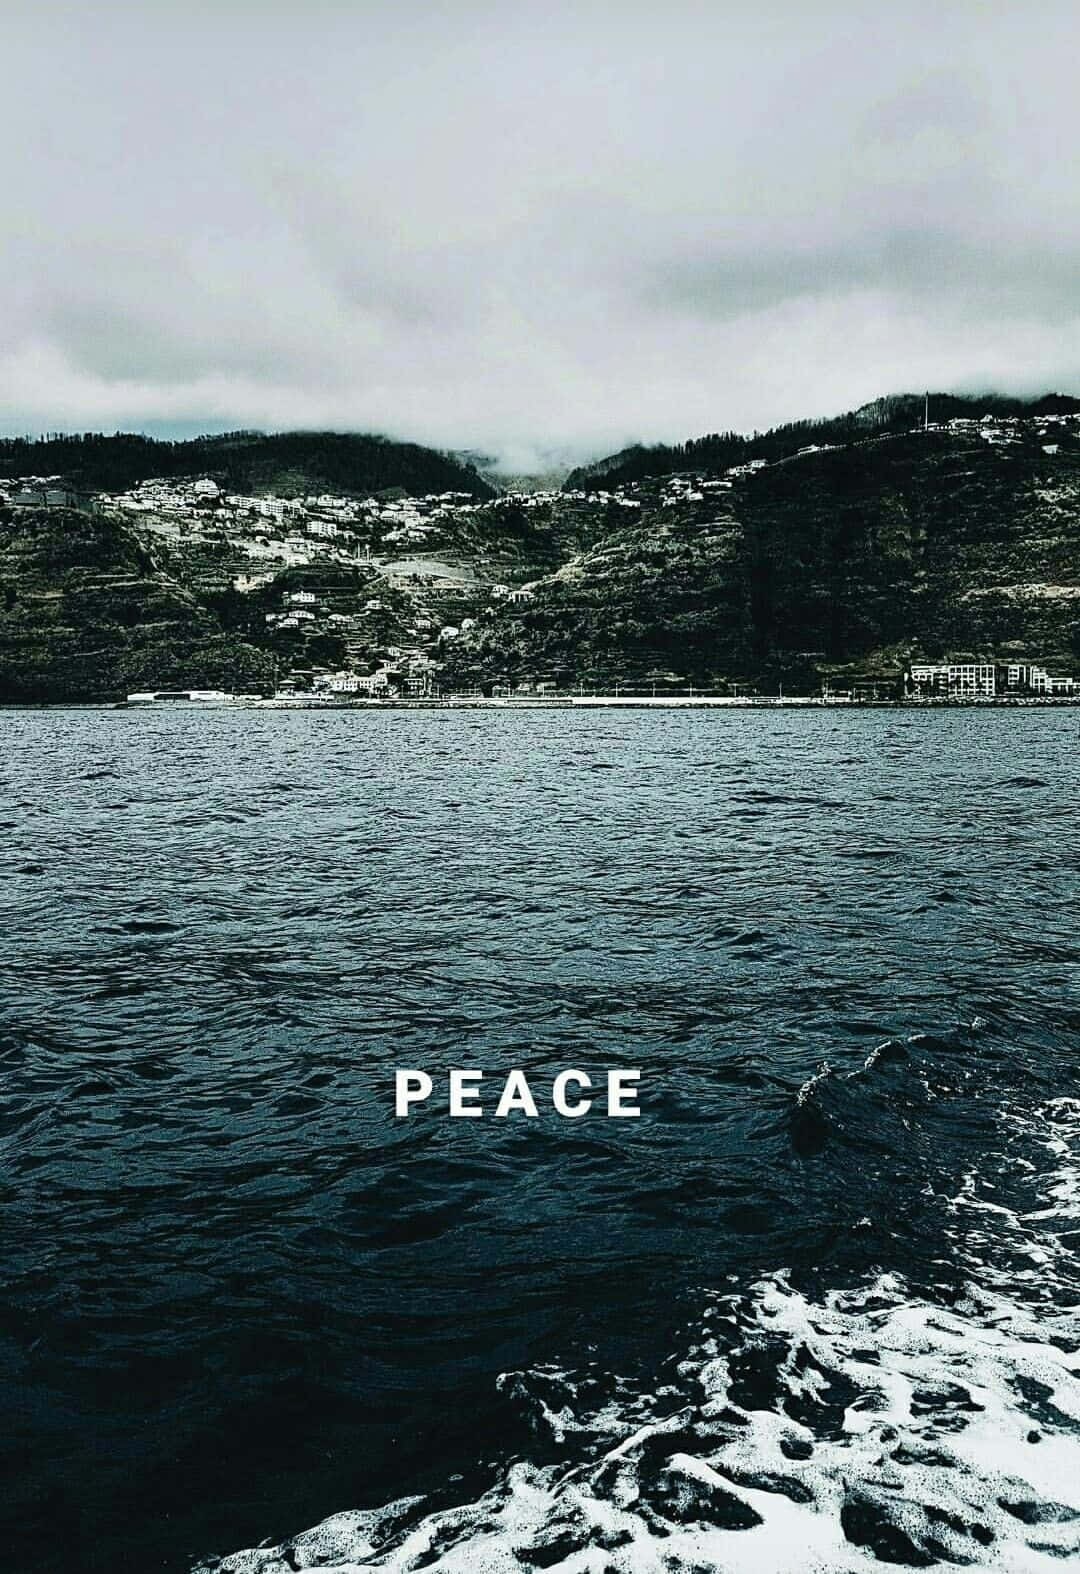 Feel the tranquility and joy of peace with the new Peace Iphone Wallpaper